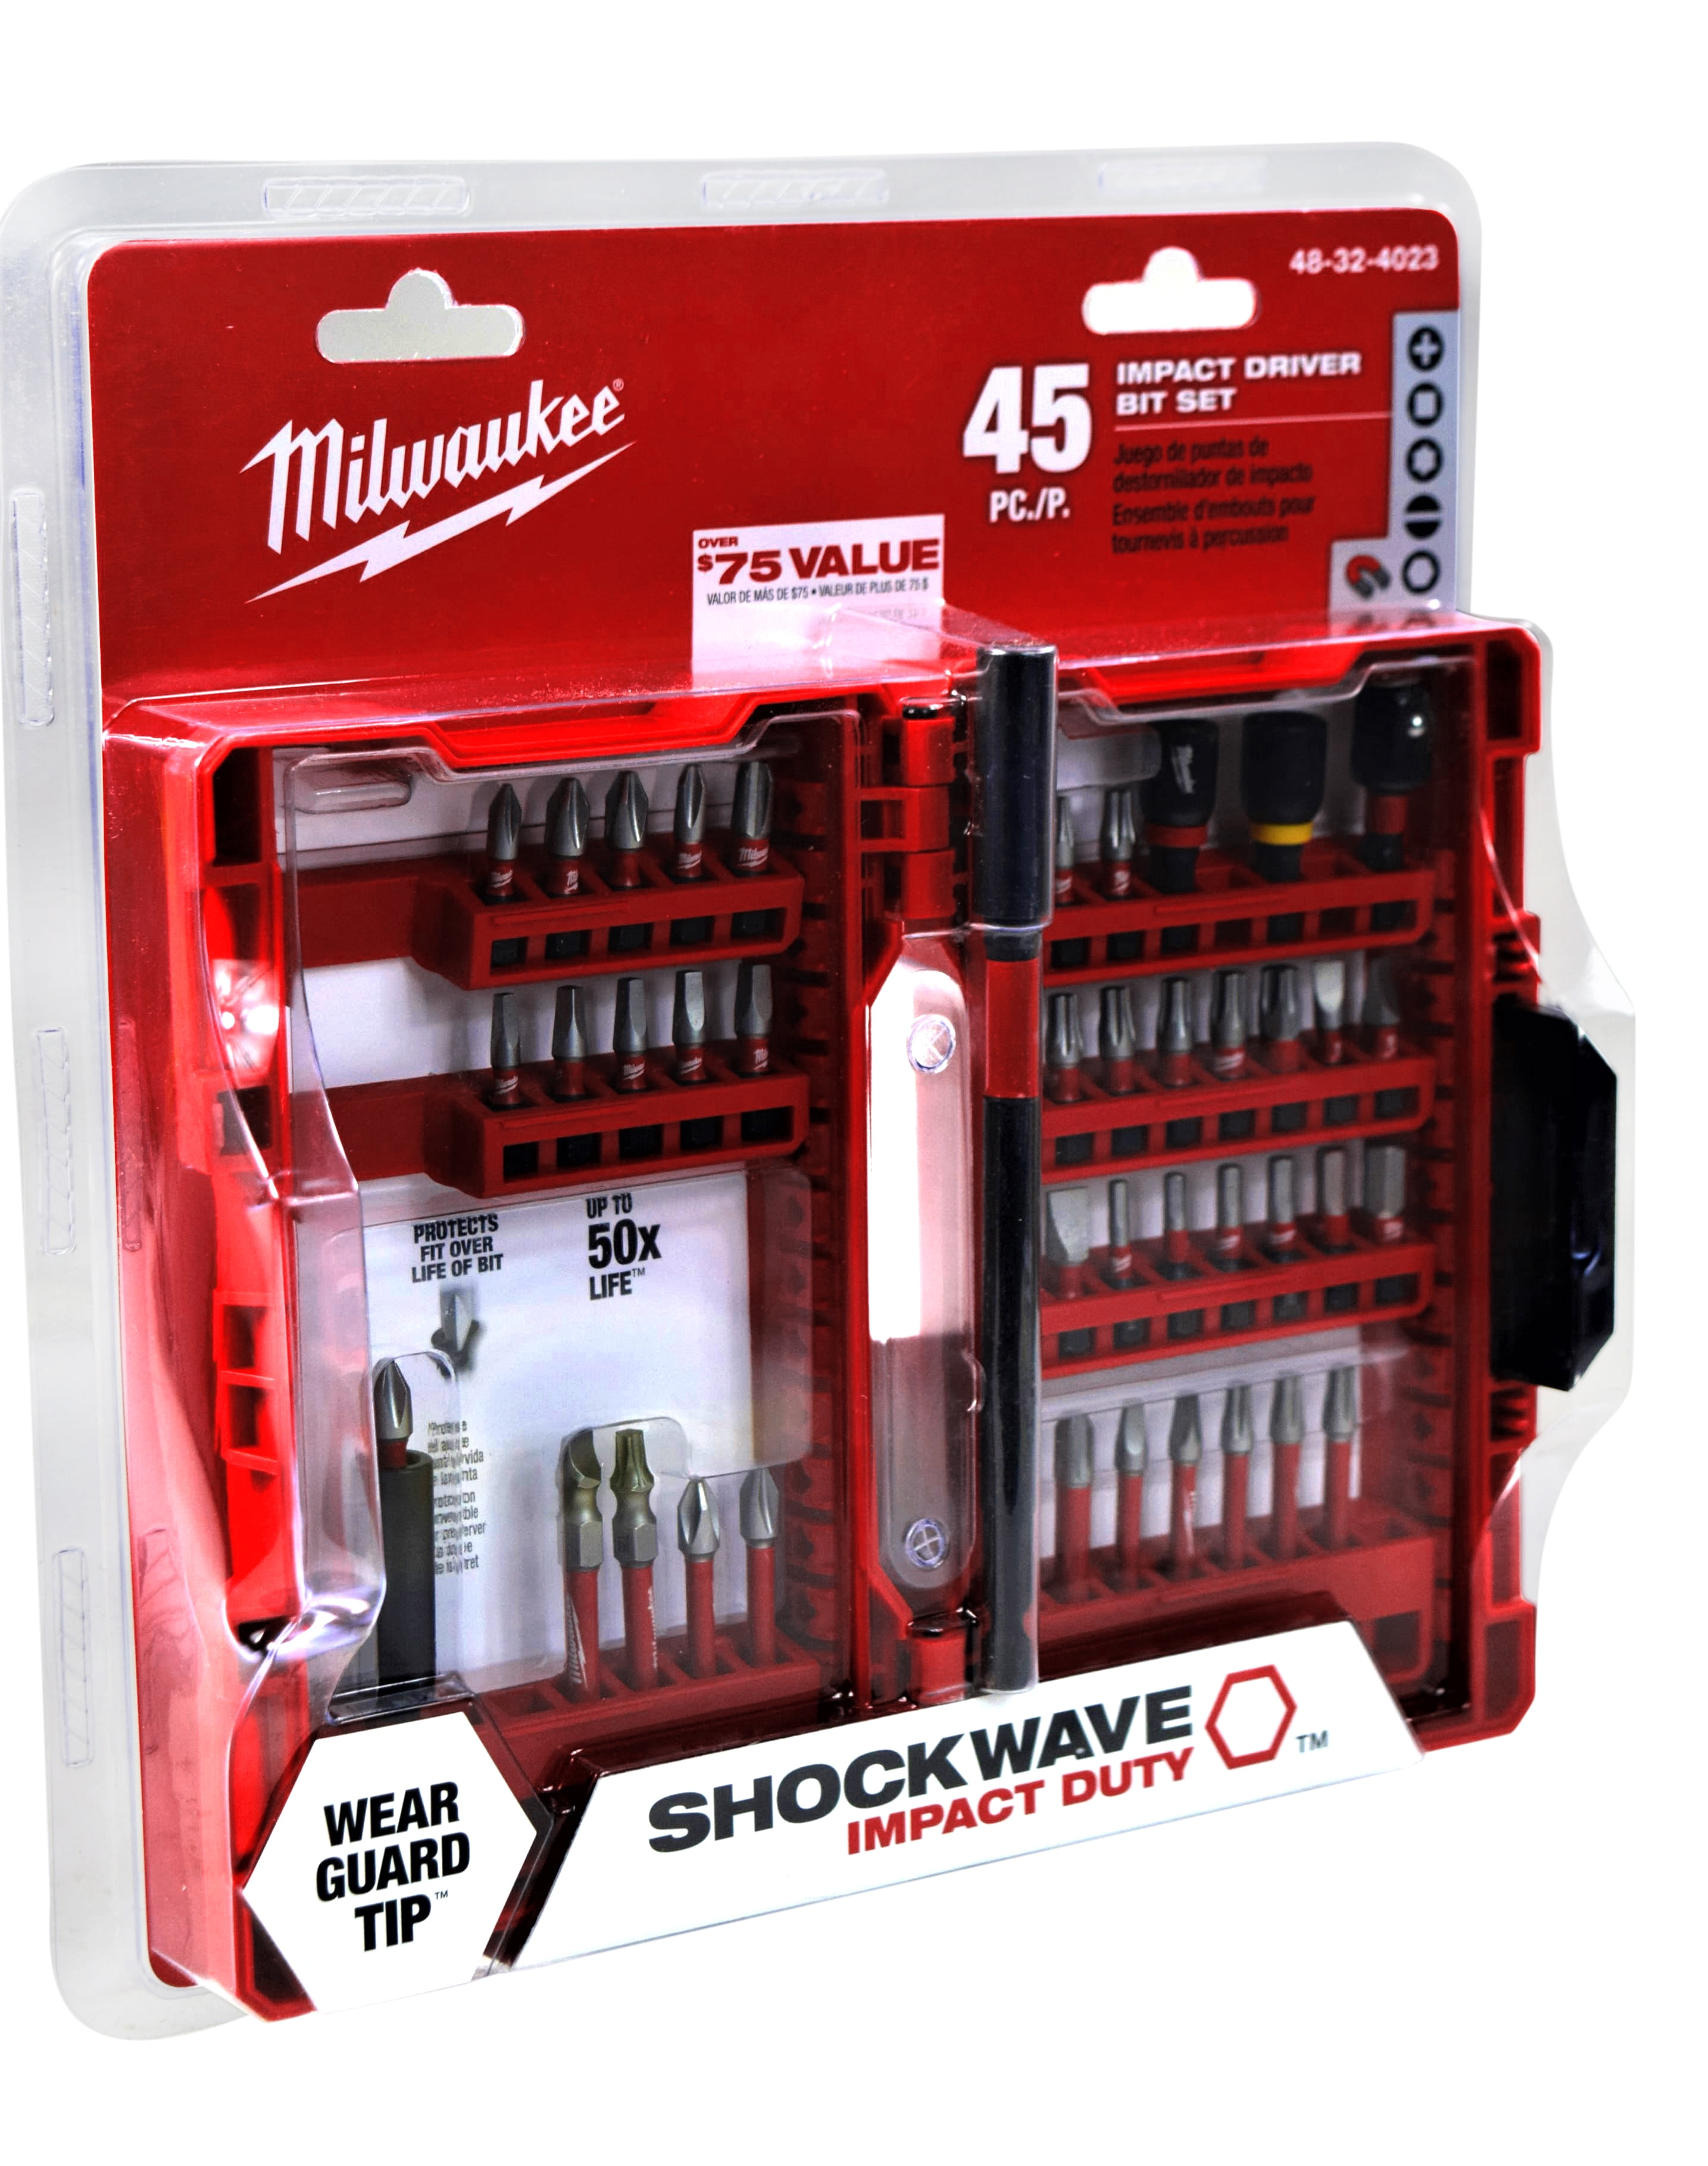 SHOCKWAVE Impact Duty Alloy Steel Drill and Screw Driver Bit Set 100-Piece 